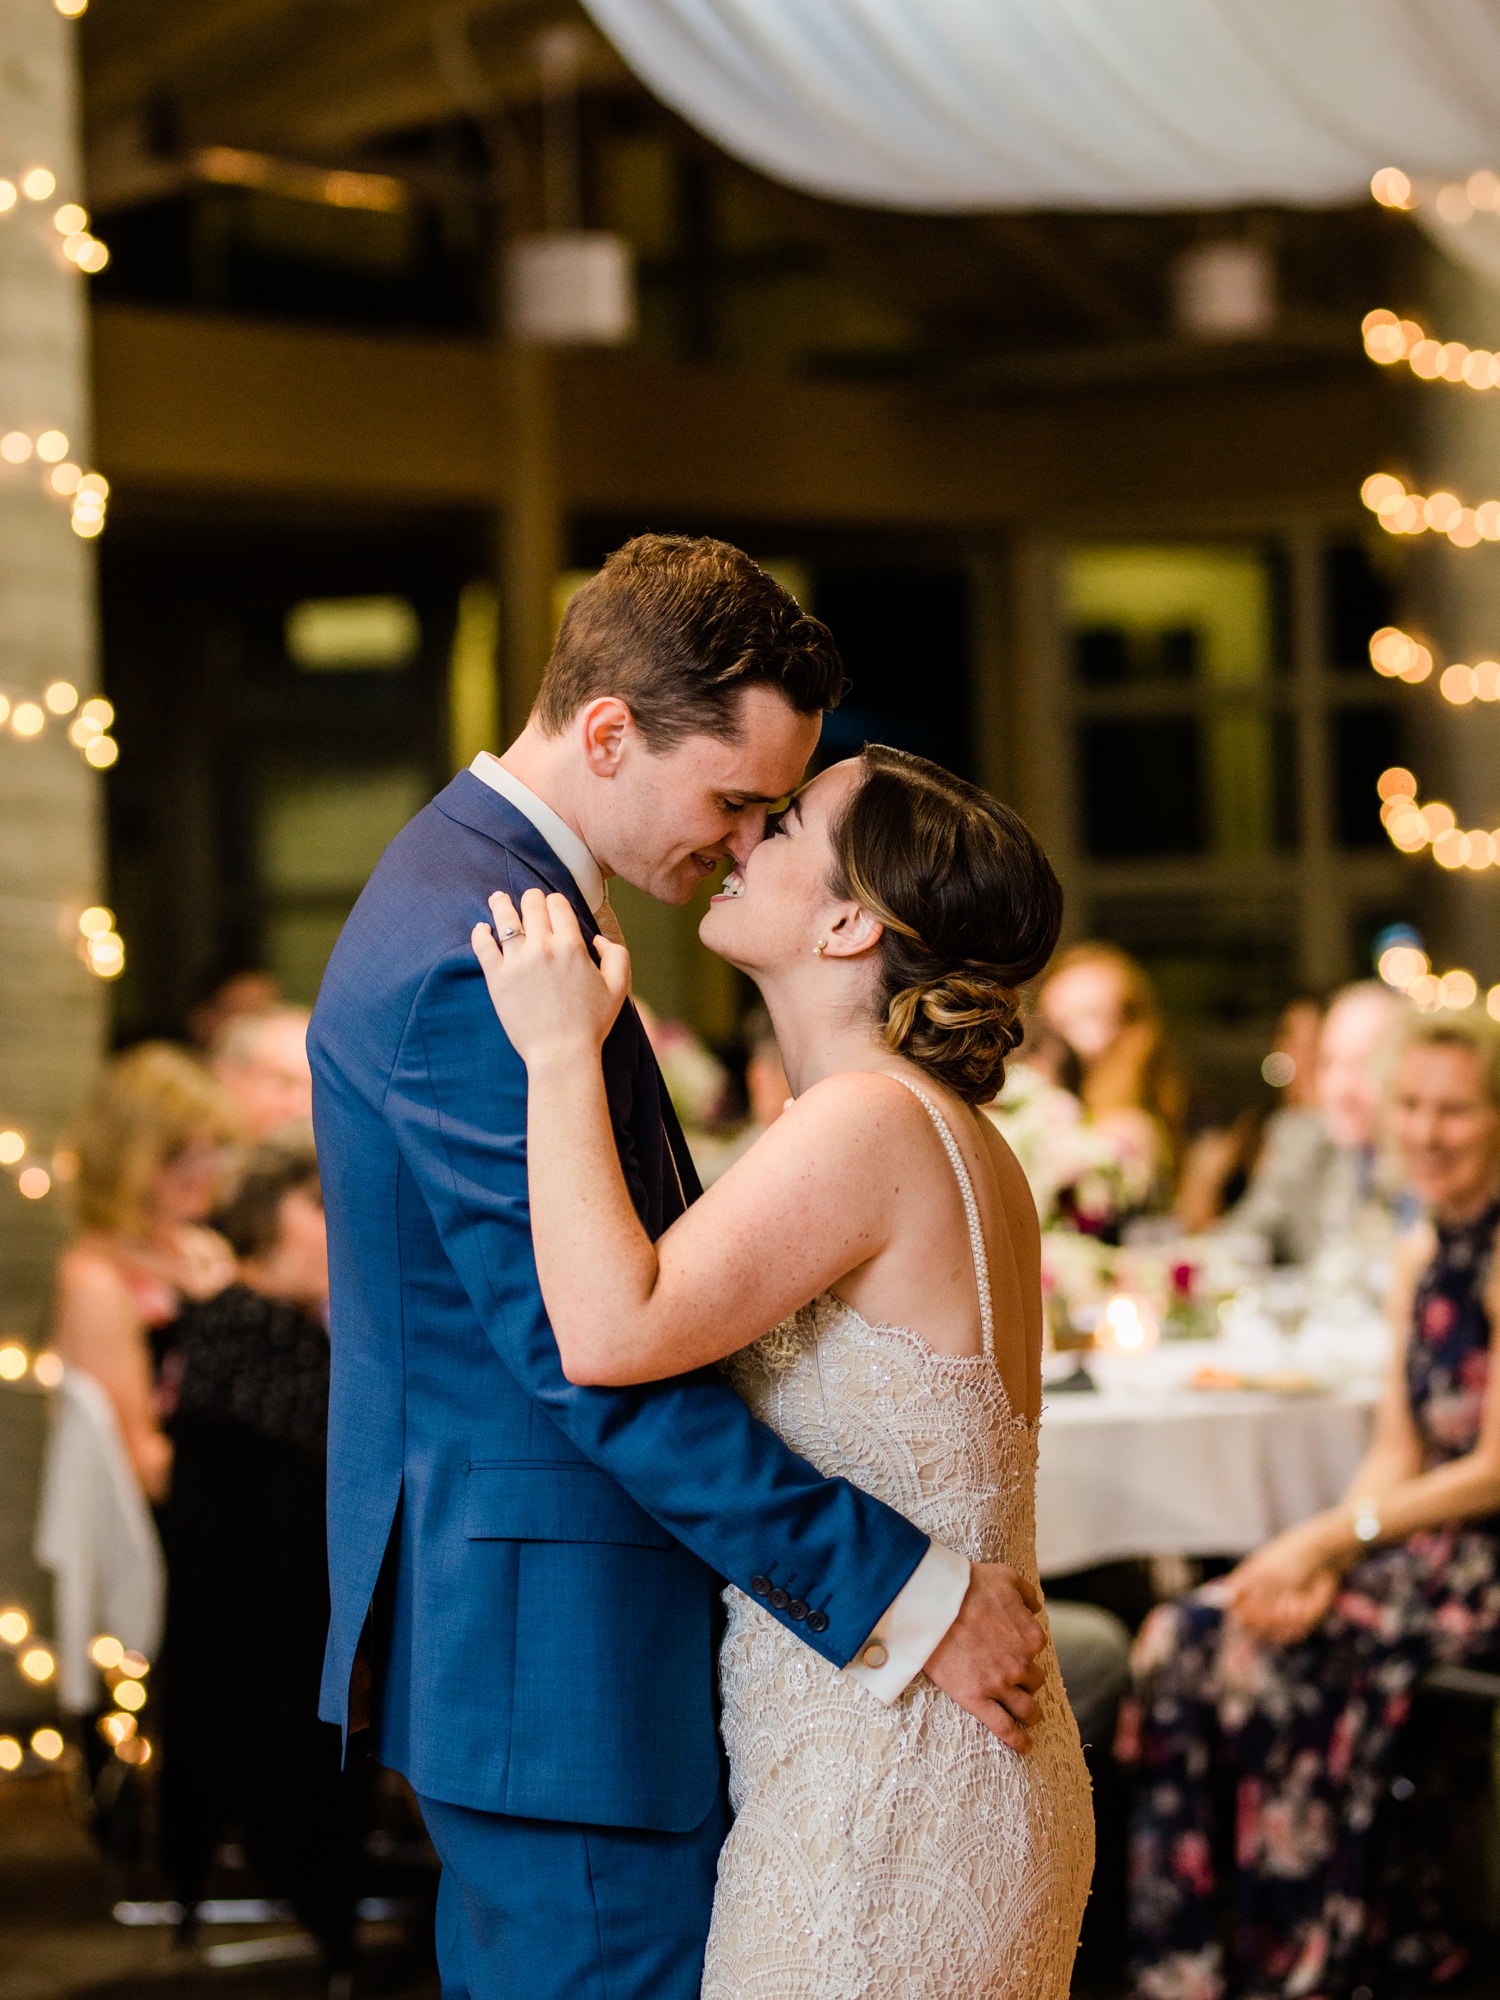 Wedding couple's first dance at Woodland Park Zoo